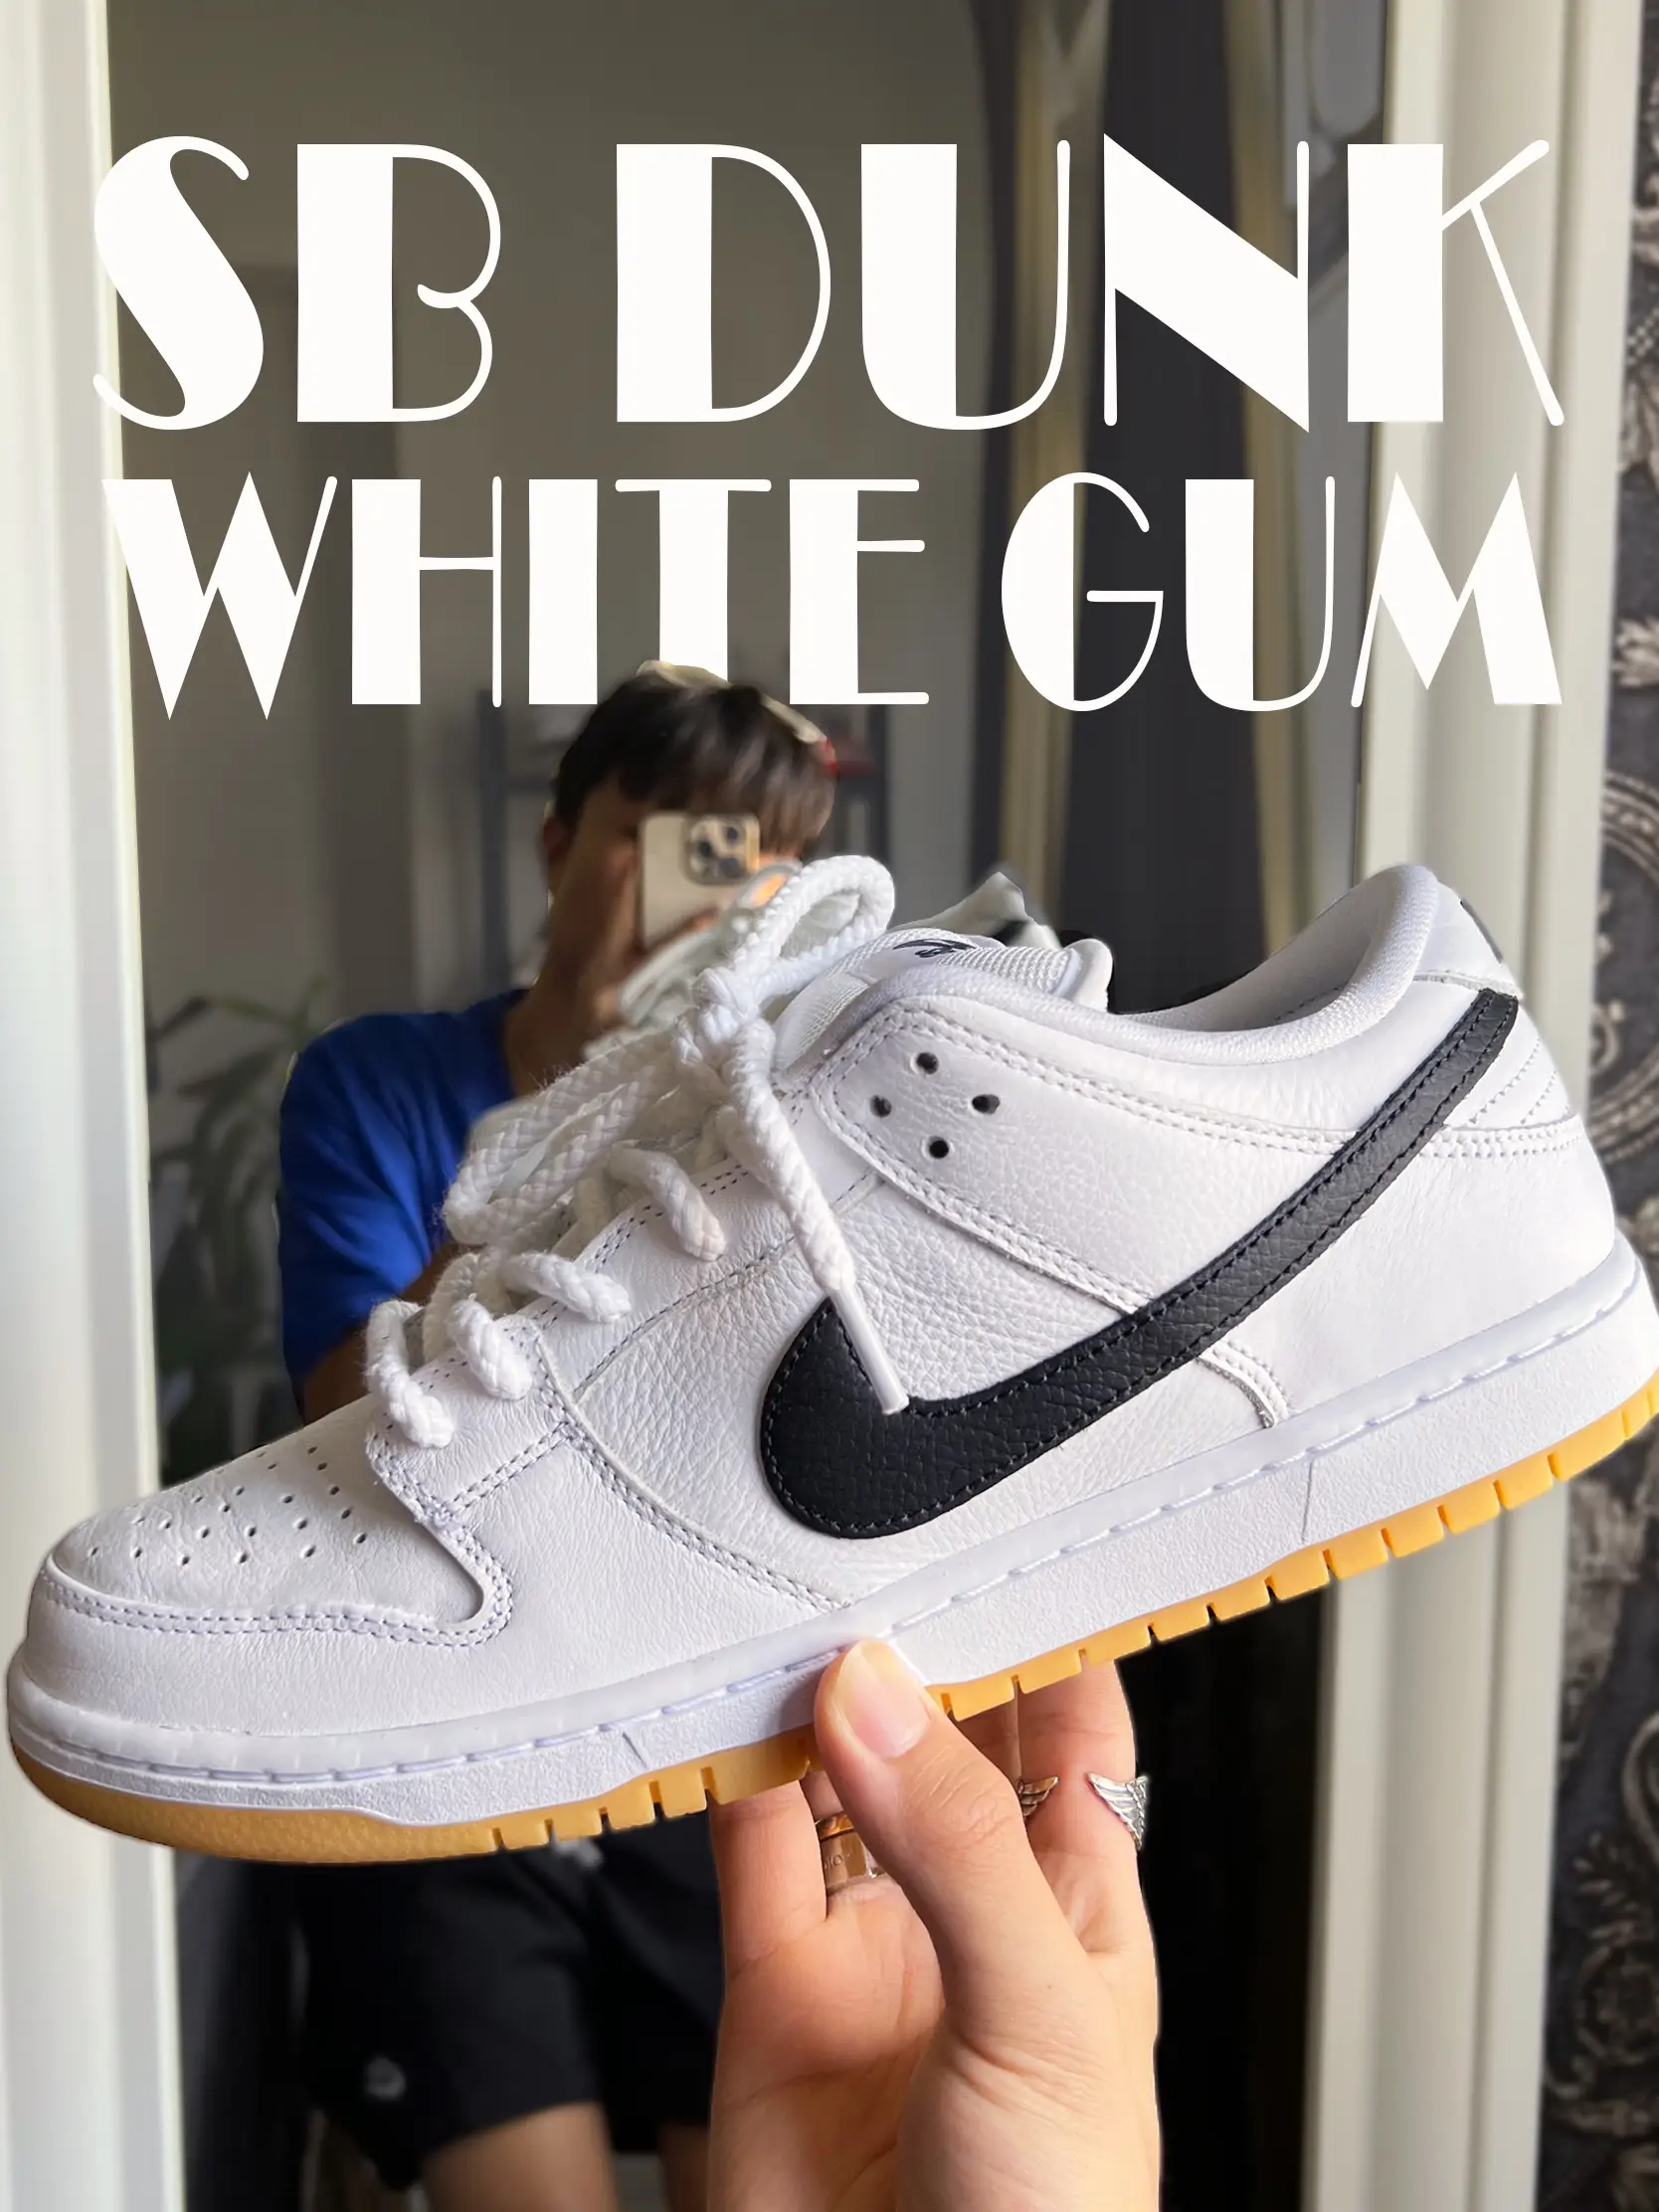 I made custom dunks instead of being like everyone else and just getting  pandas but now idk how i feel about them 😭opinions? : r/Sneakers